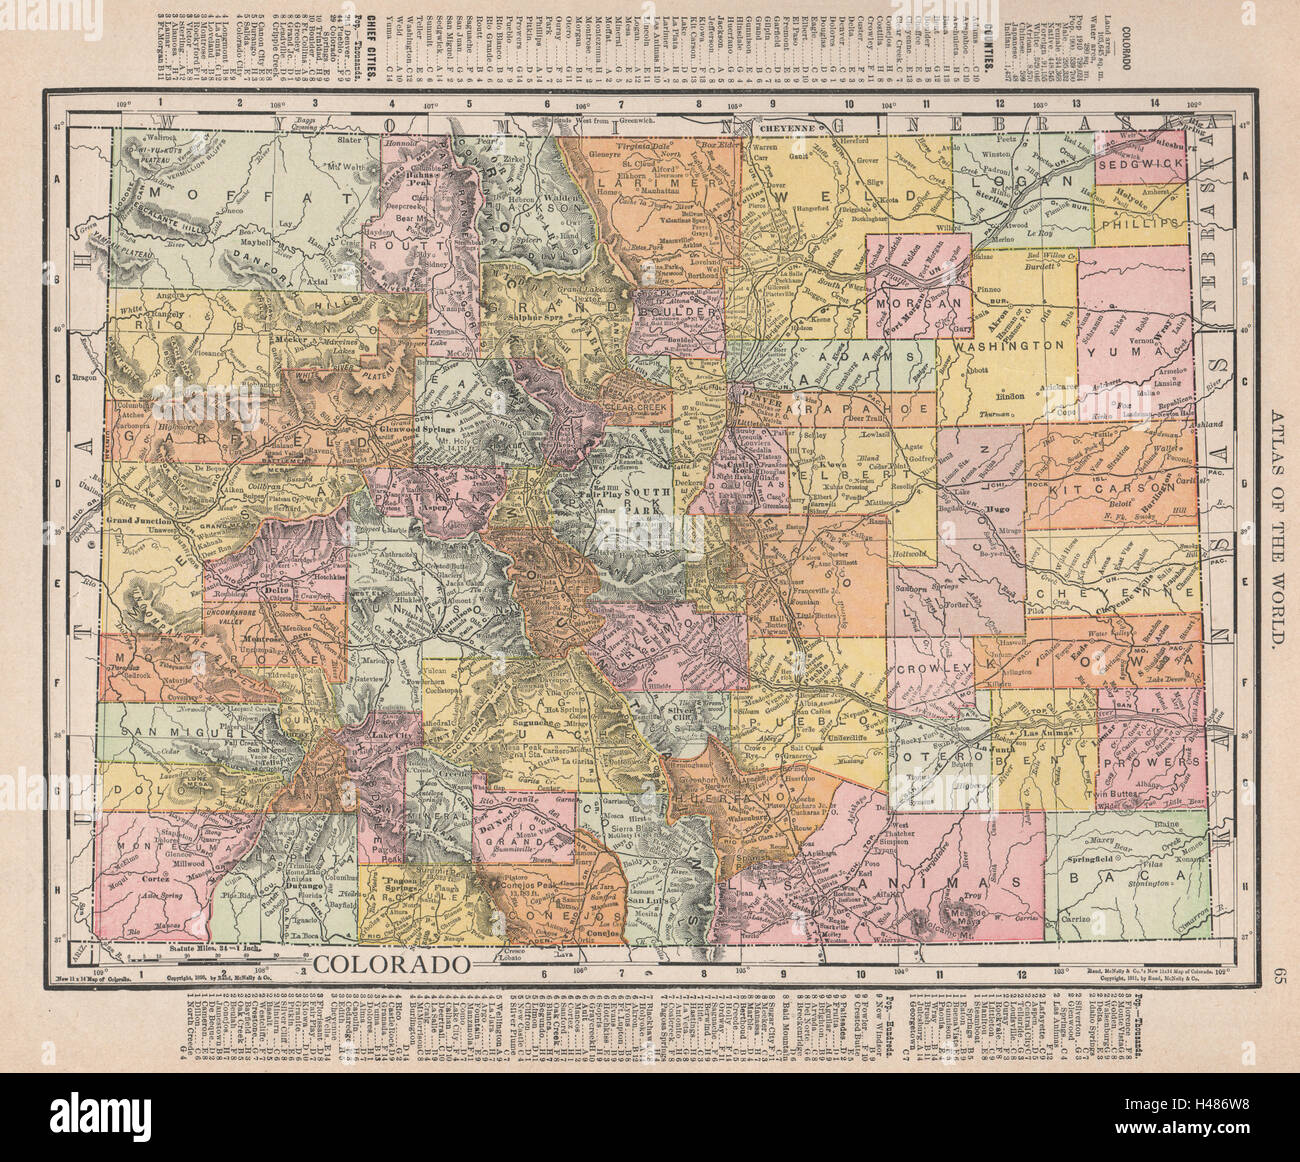 Colorado state map showing counties. RAND MCNALLY 1912 old antique chart Stock Photo